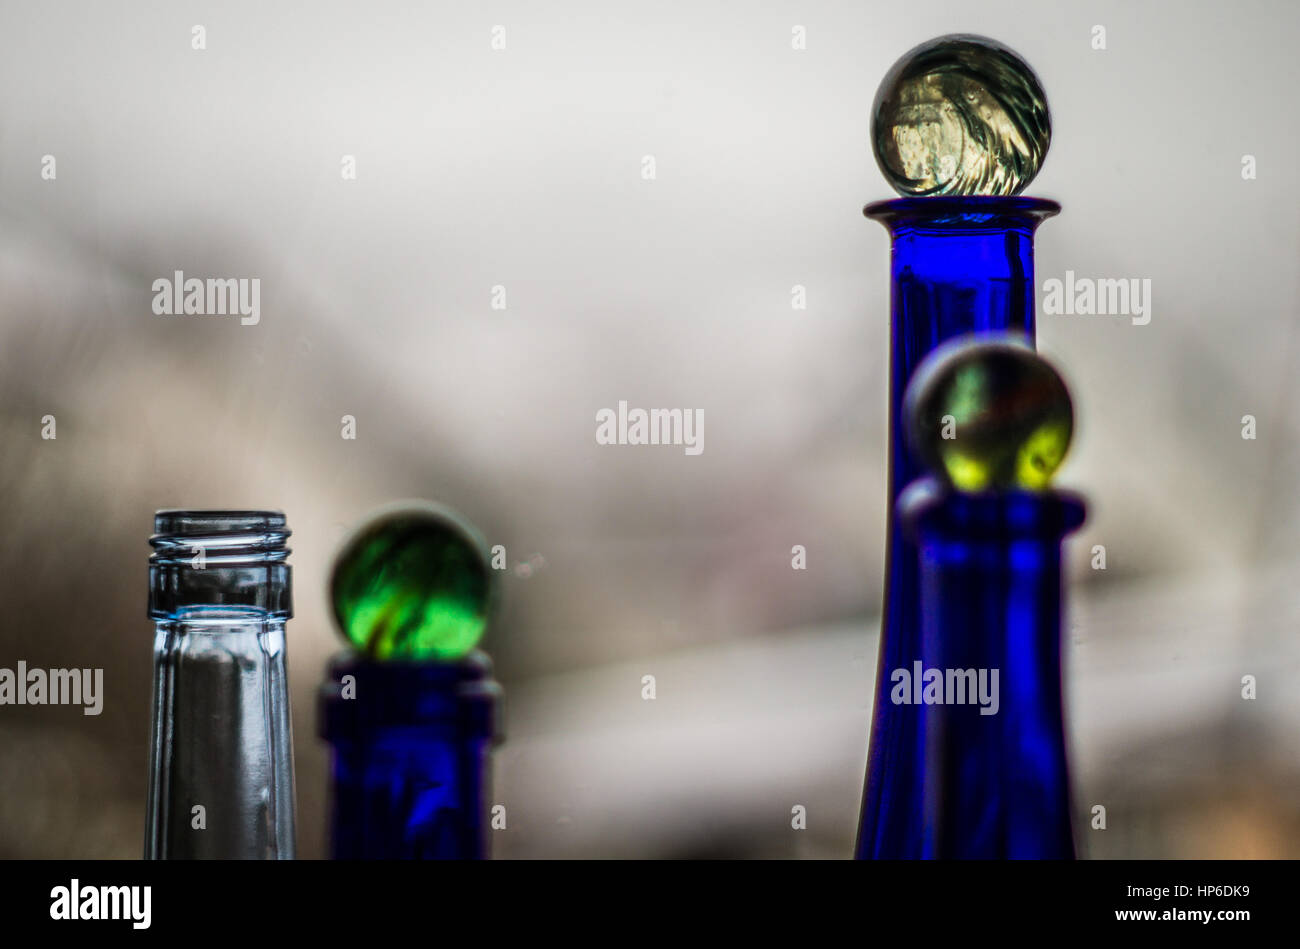 Green marbles on blue bottle Stock Photo